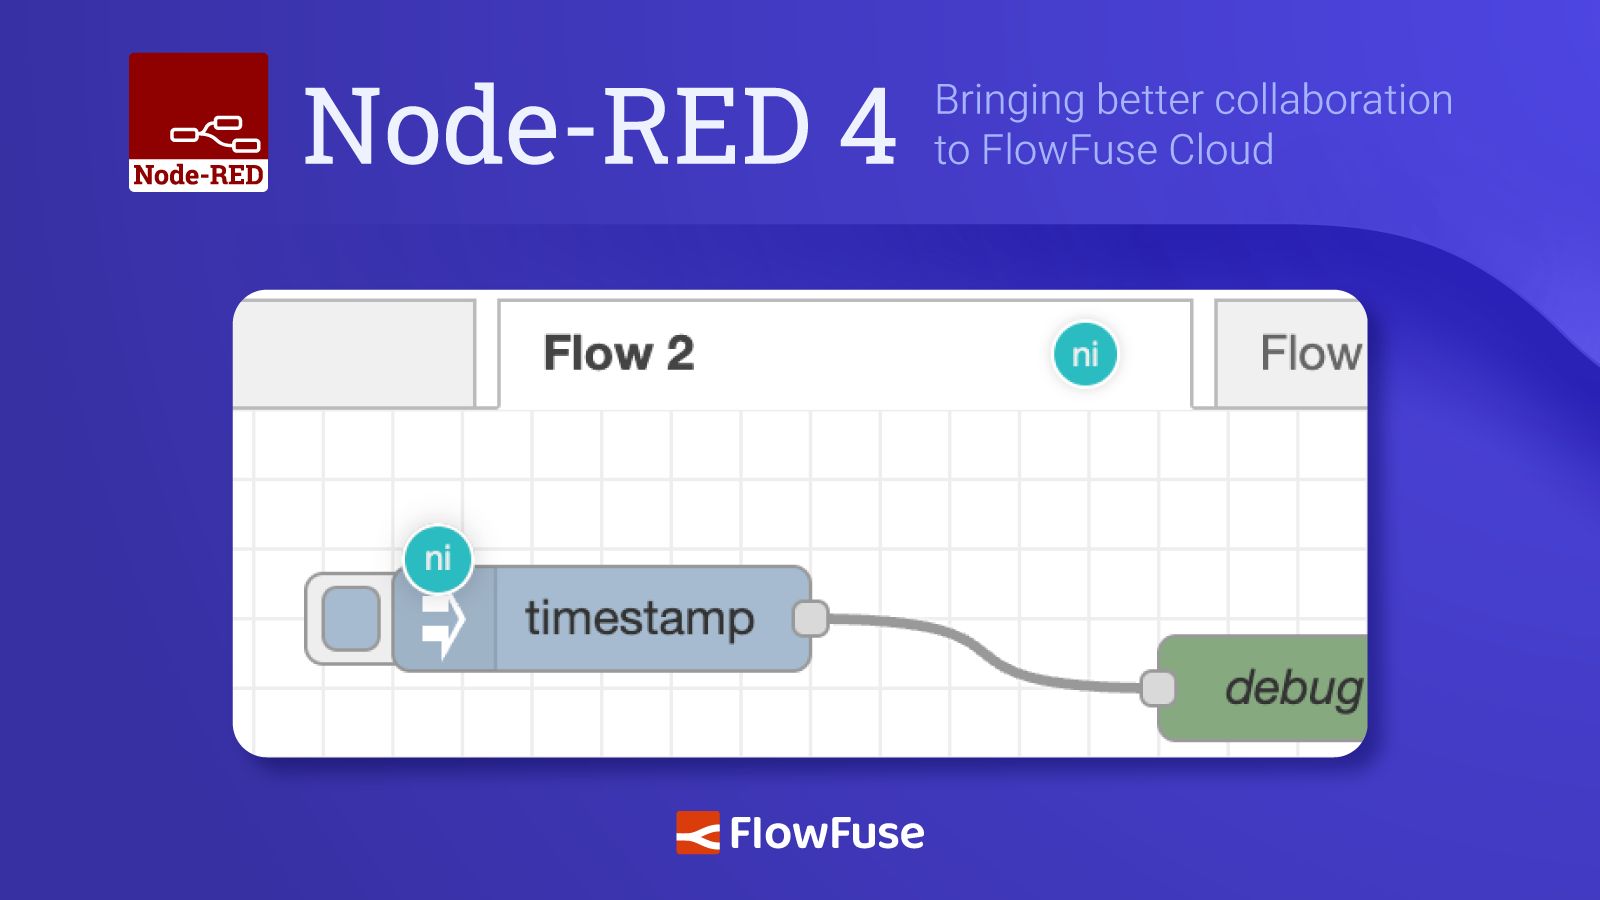 Image representing Node-RED 4: Bringing better collaboration to FlowFuse Cloud